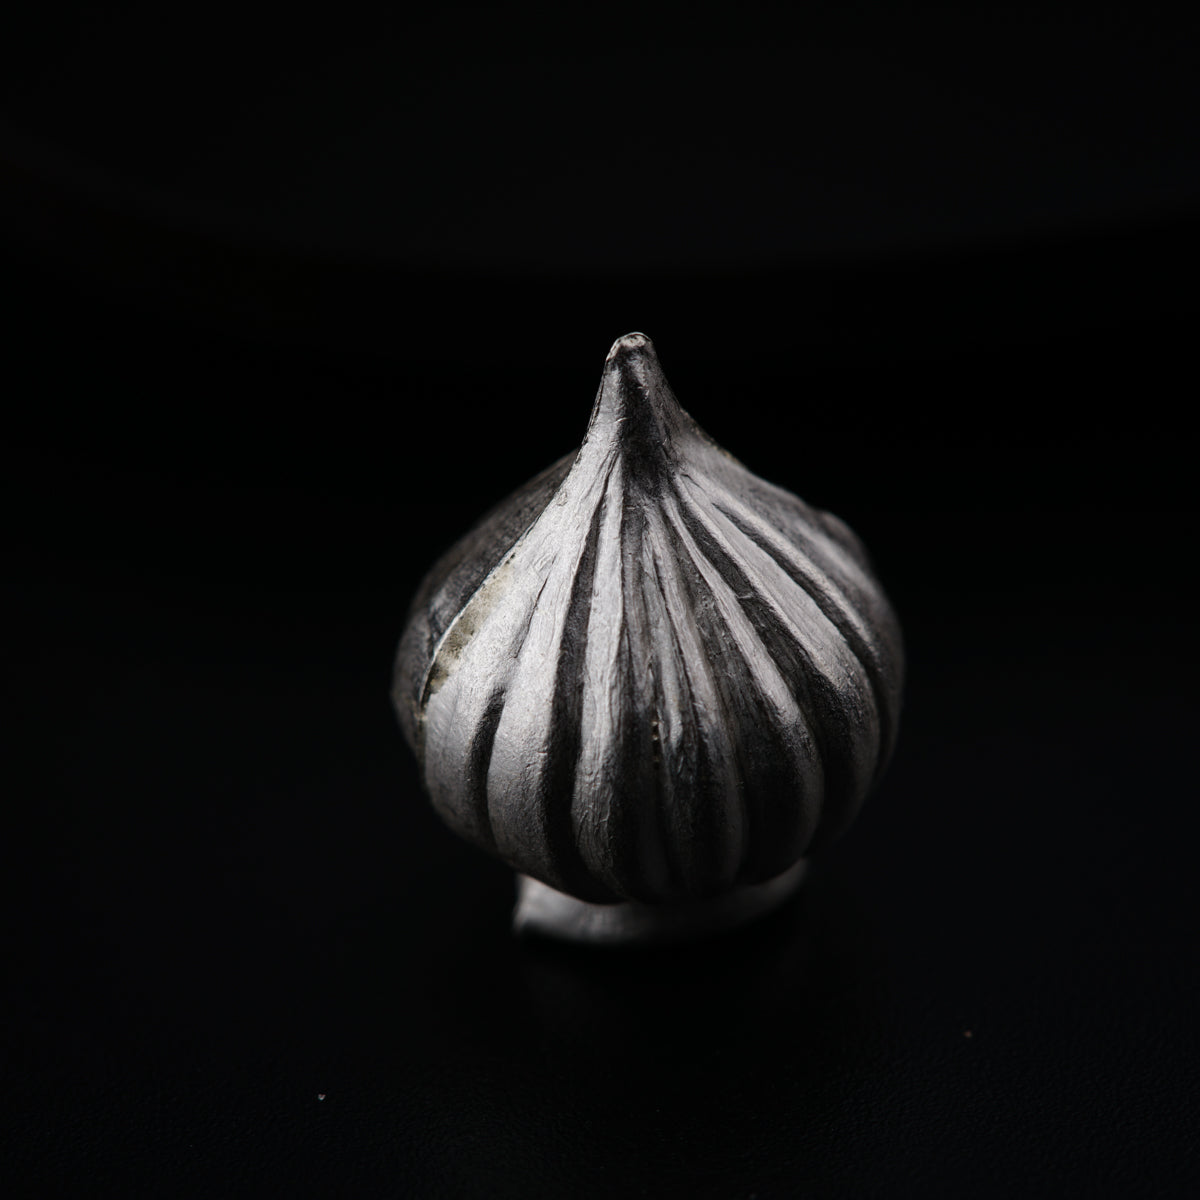 a black and white photo of a garlic